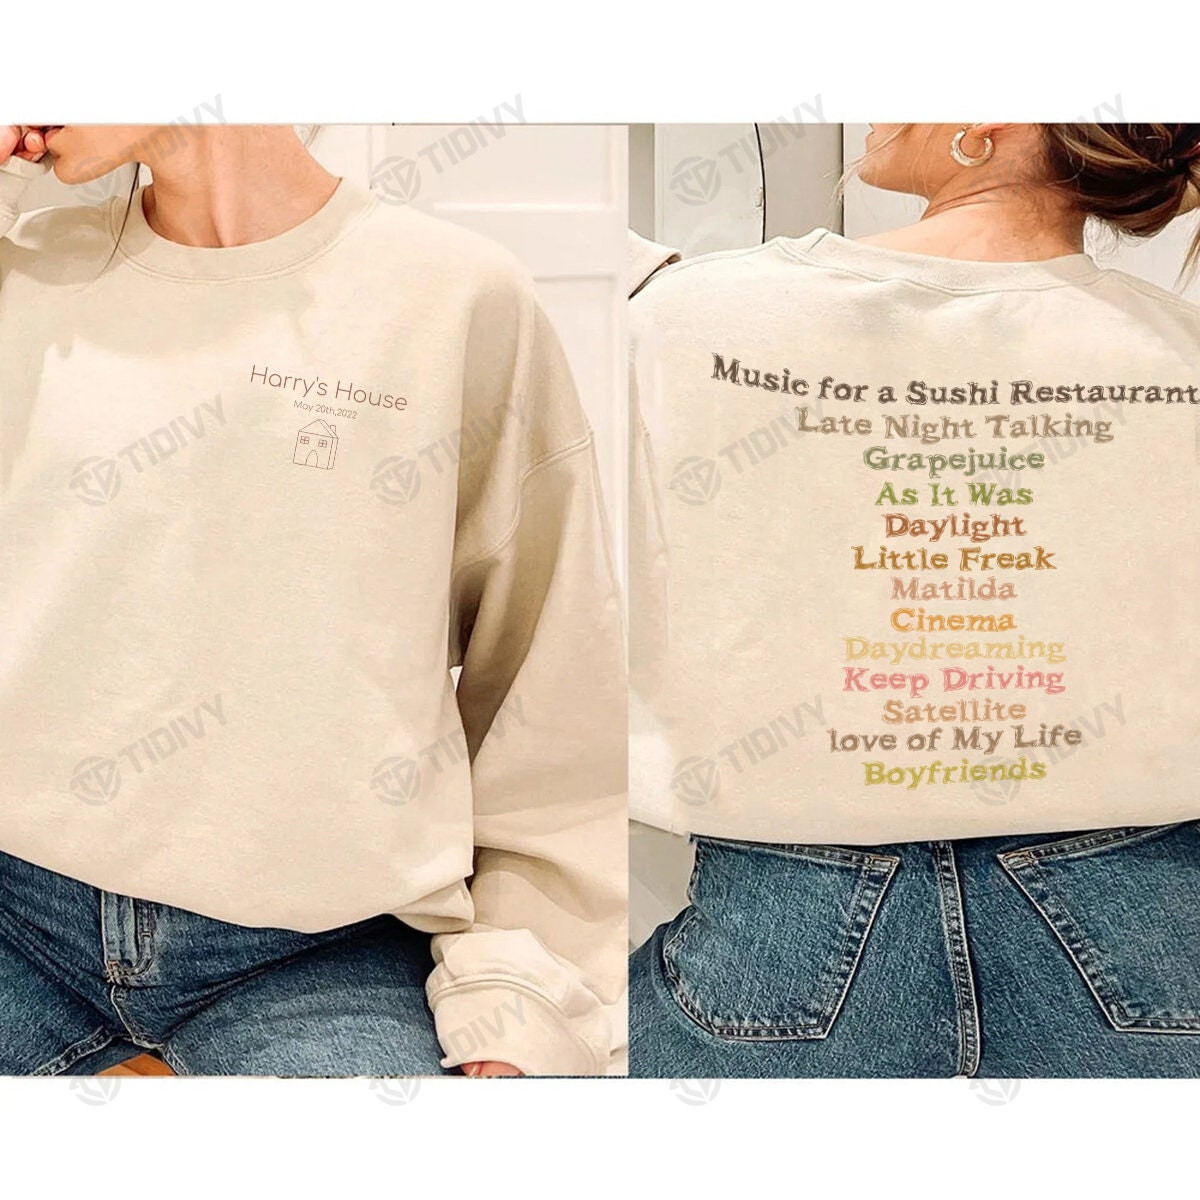 Harry House Track List Music For A Sushi Restaurant Harry Styles Love On Tour 2022 Harry'S House Two Sided Graphic Unisex T Shirt, Sweatshirt, Hoodie Size S - 5XL